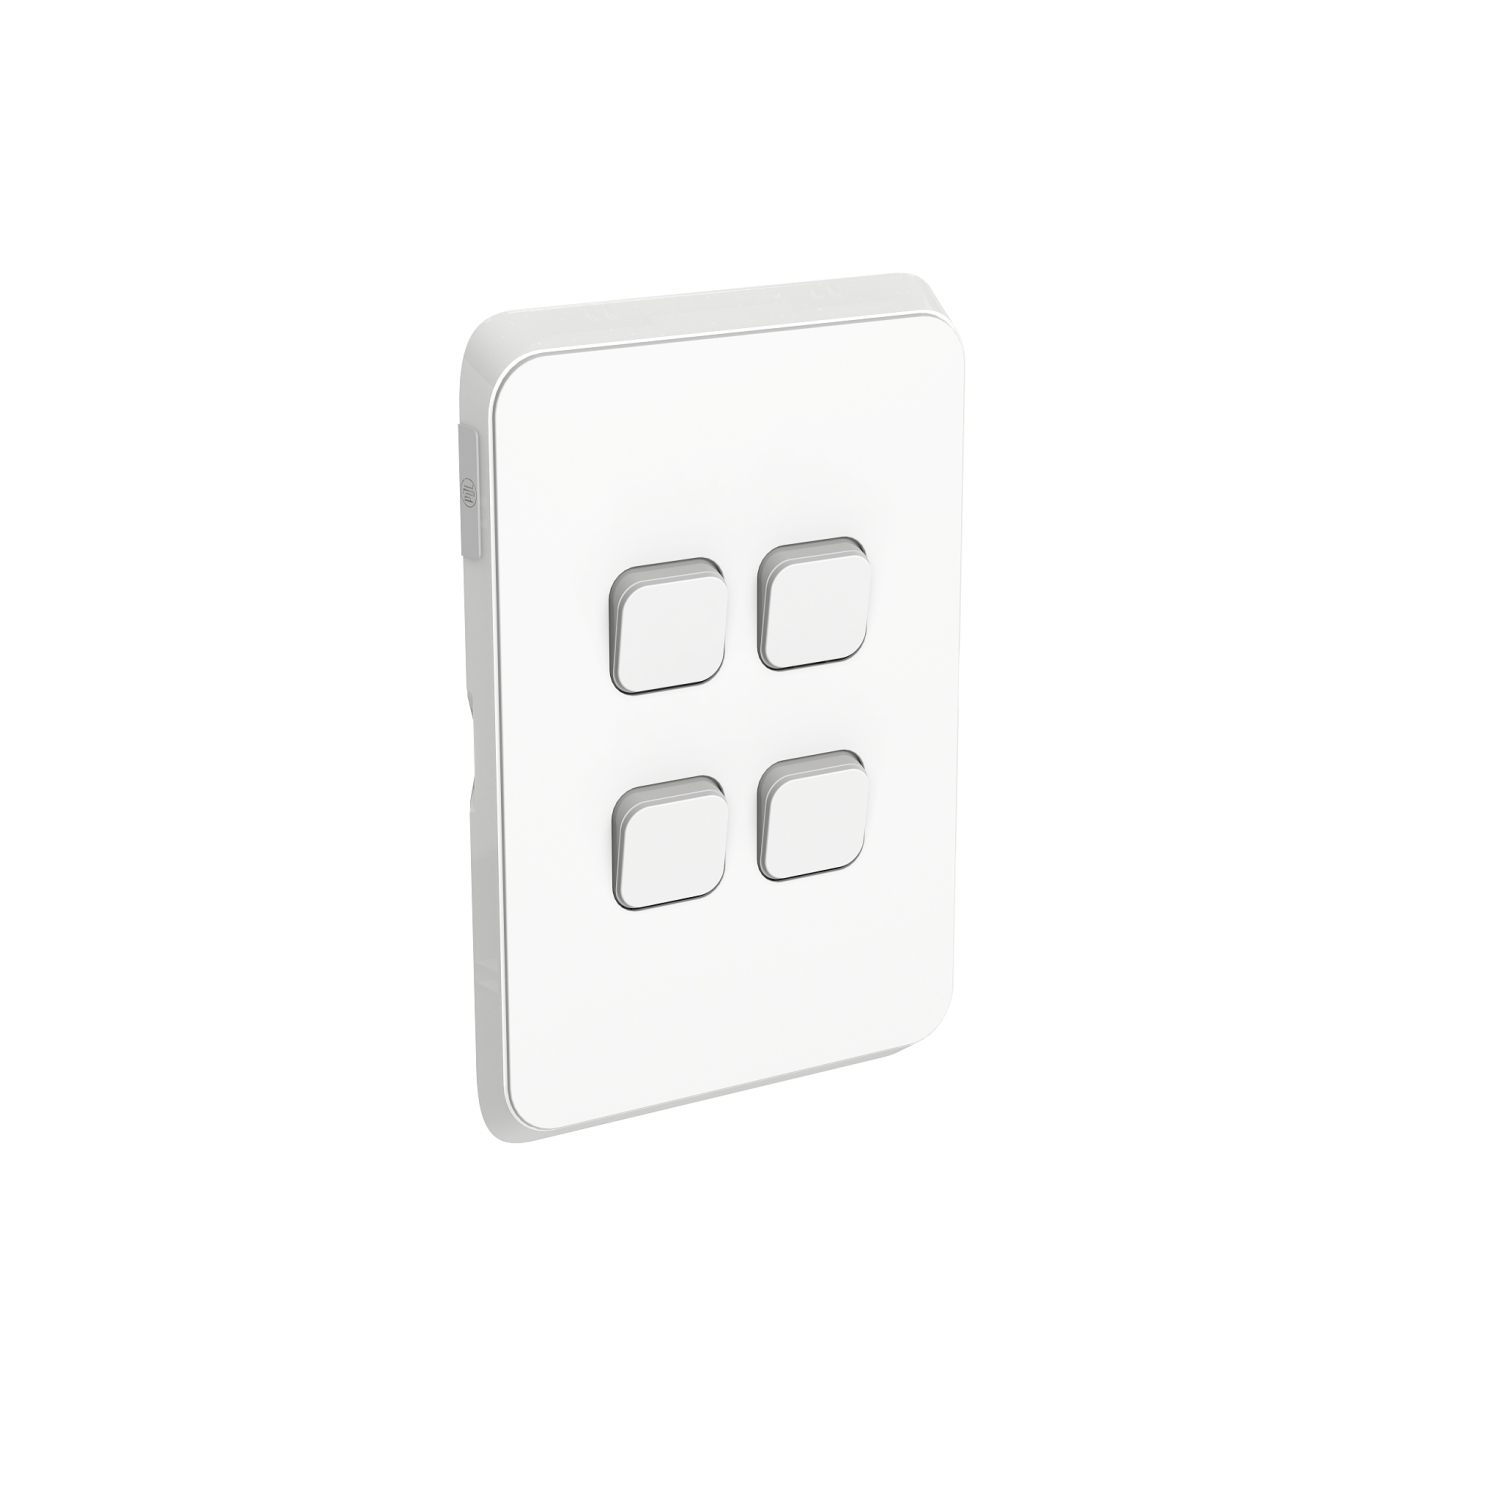 PDL Iconic - Cover Plate Switch 4-Gang - Vivid White